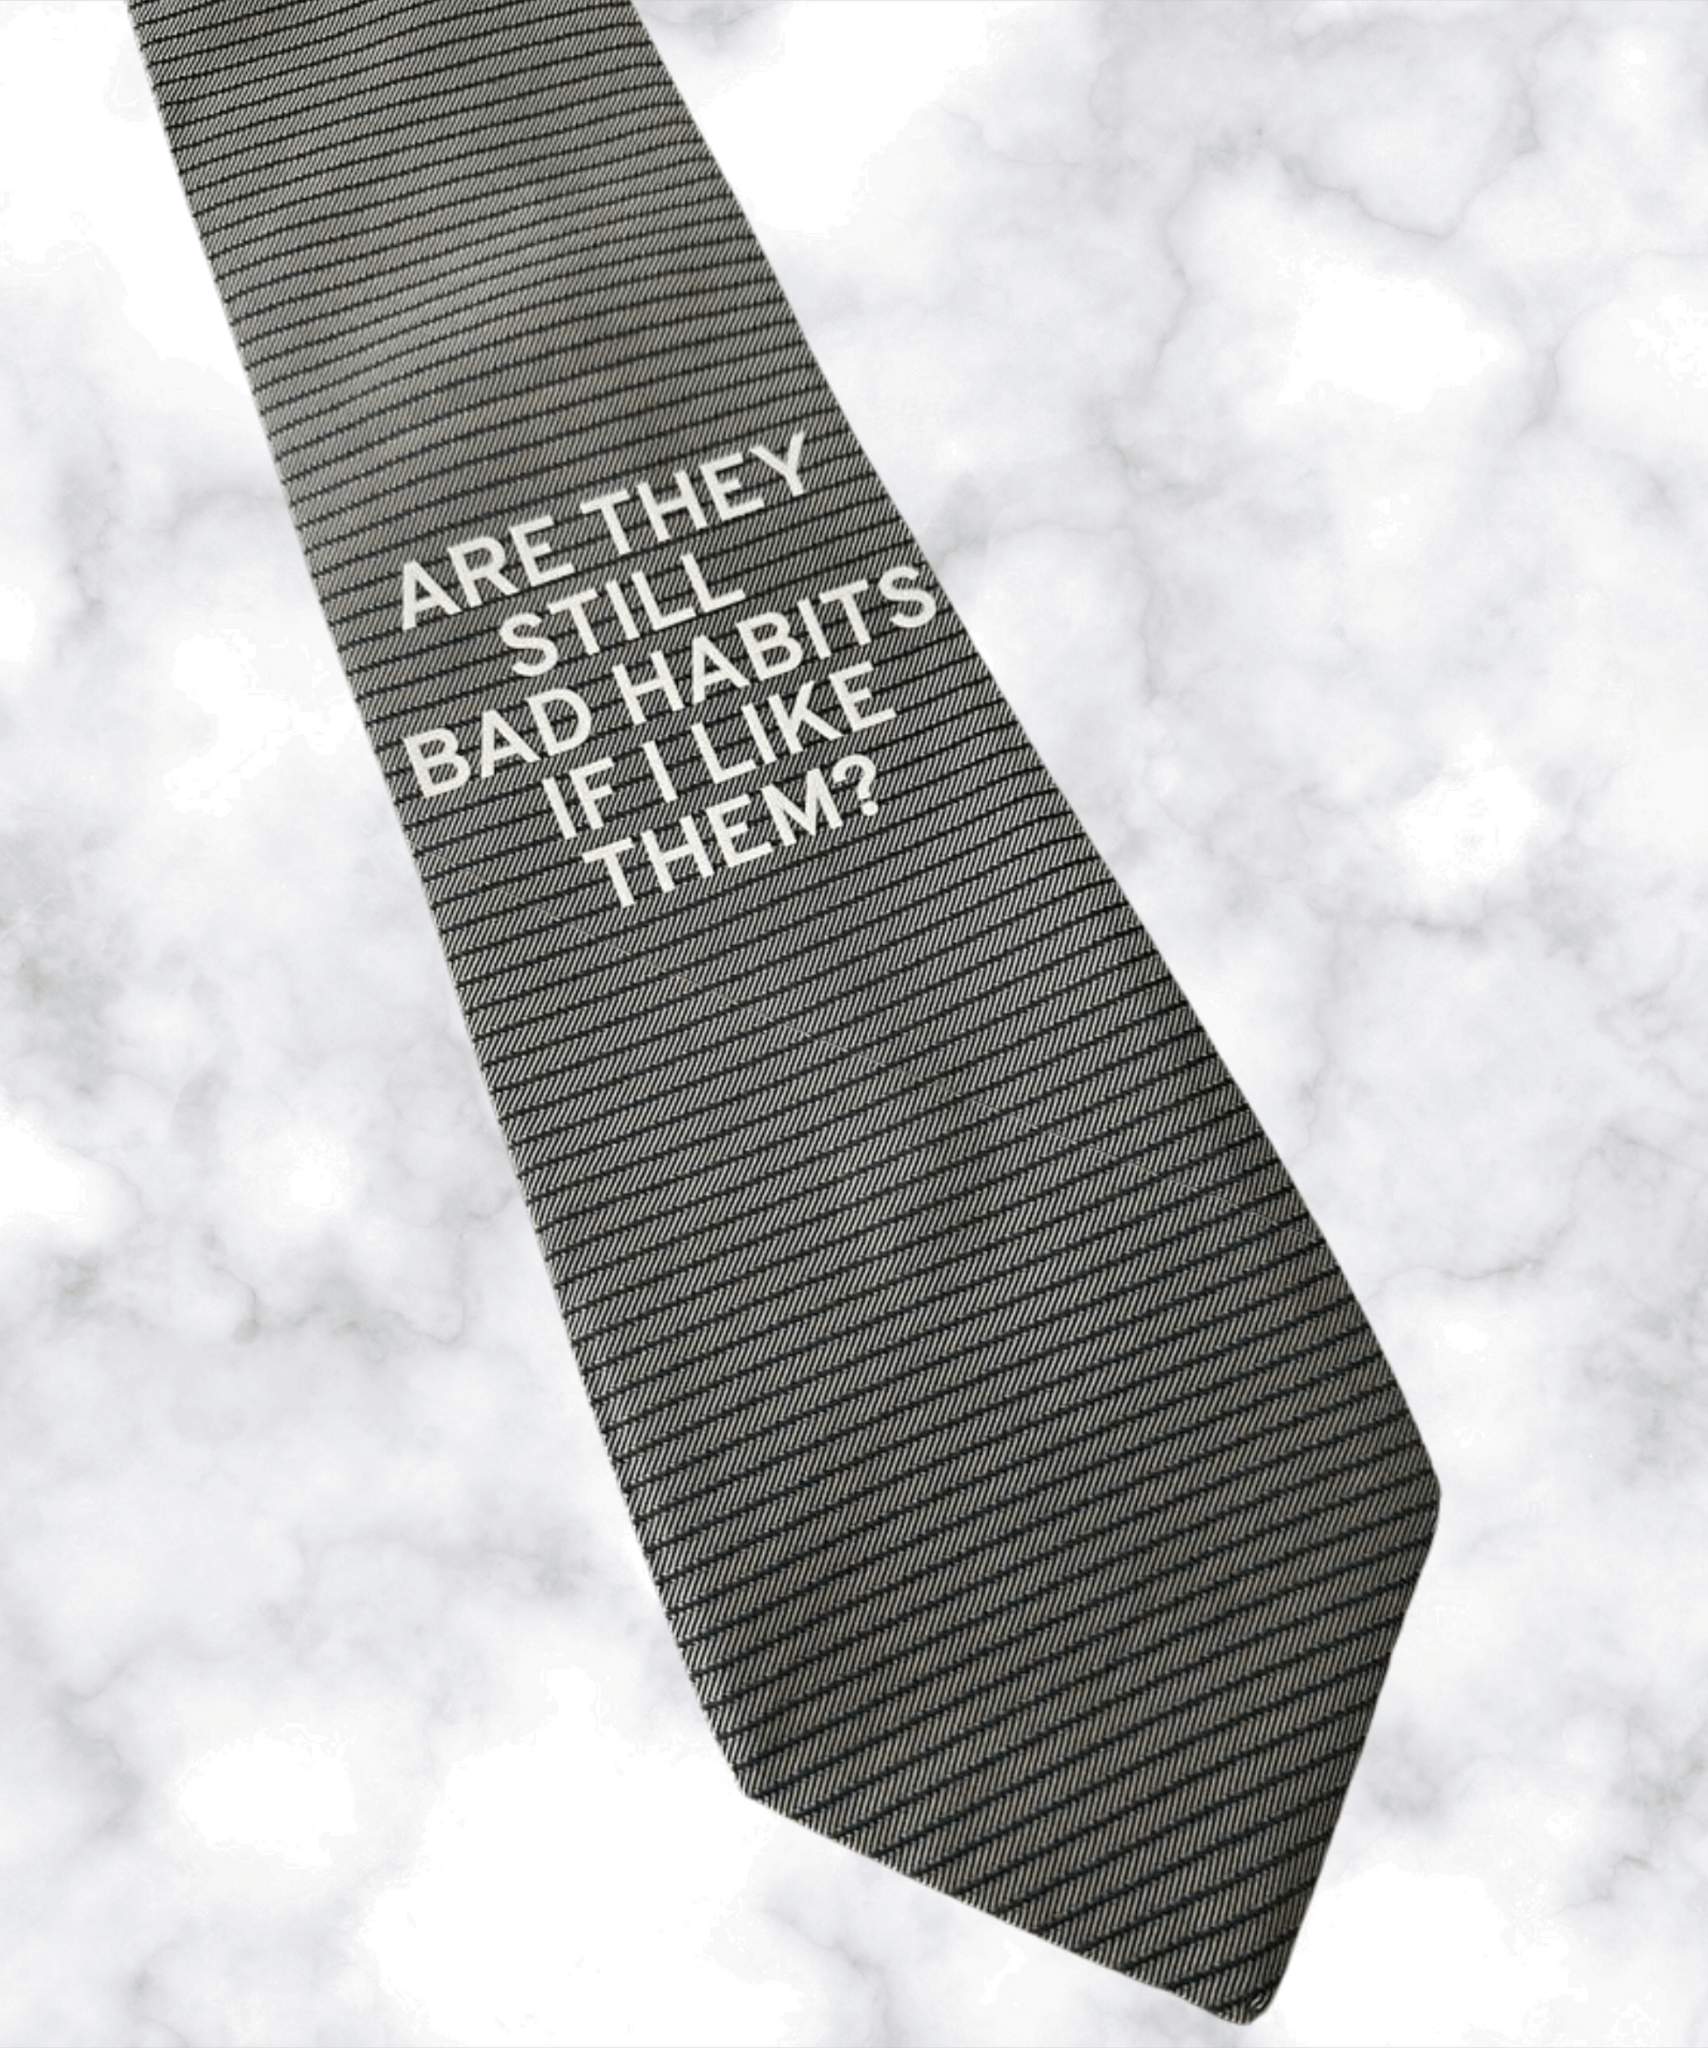 Upcycled Tie ‘ARE THEY STILL BAD HABITS IF I LIKE THEM?’ - OBLIVIOUS?